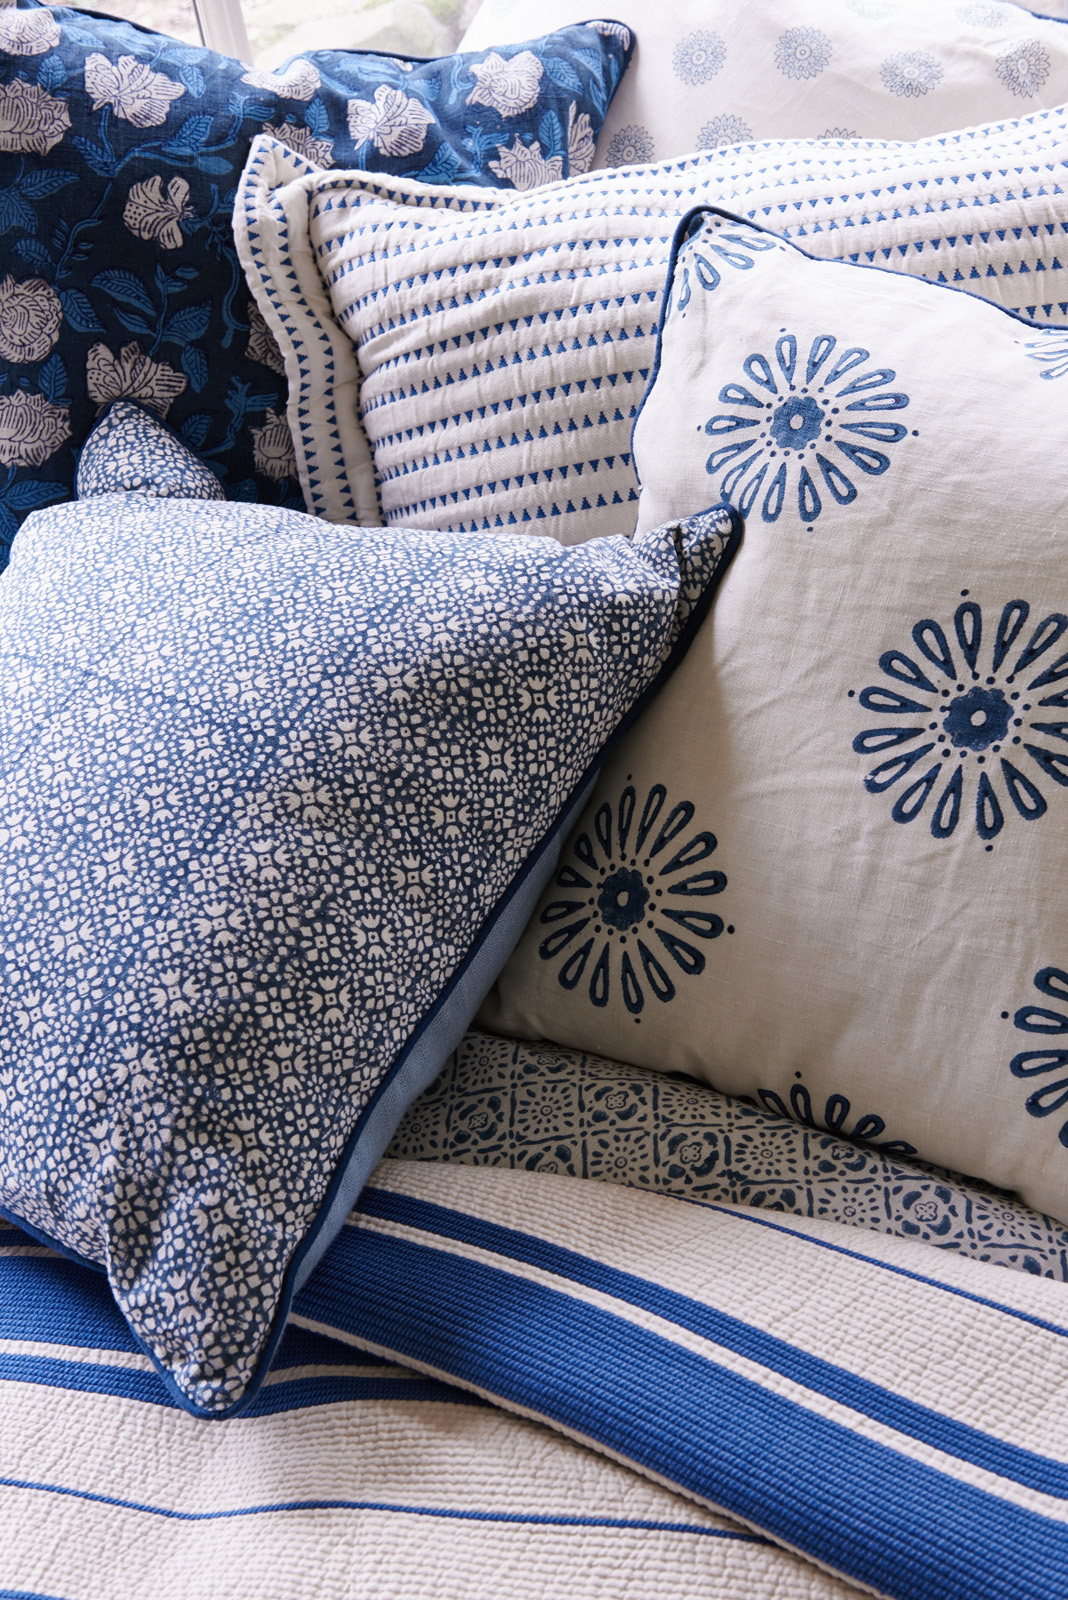 Blue and white soft furnishings.